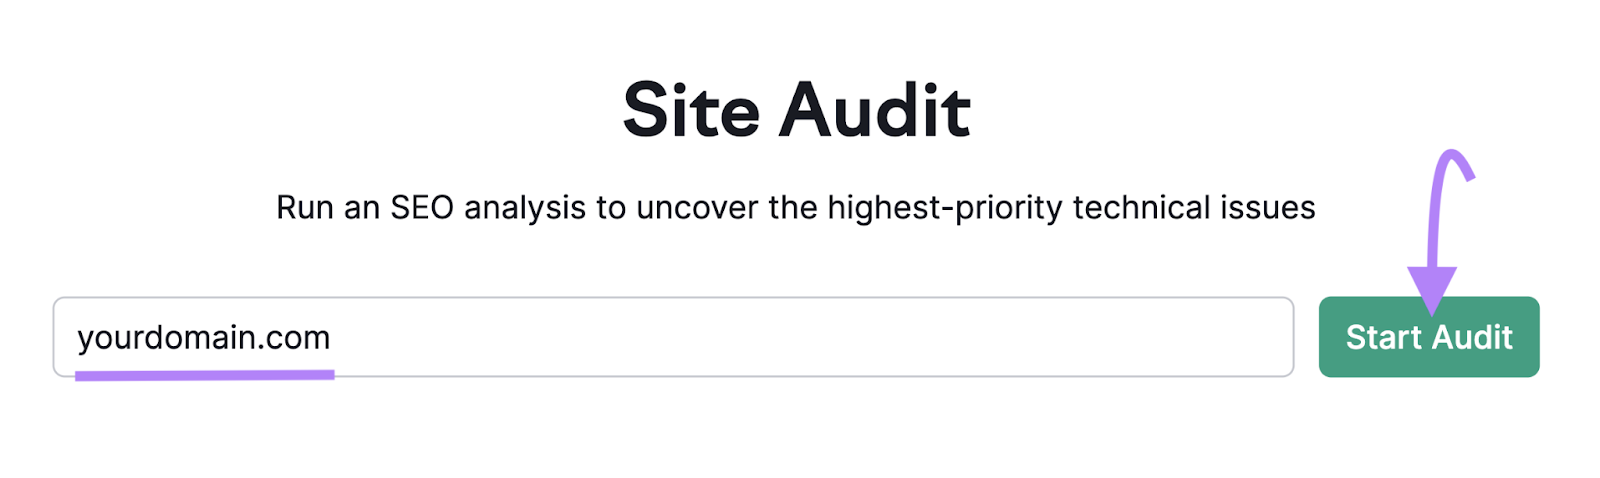 Site Audit interface to adhd  a domain name, with yourdomain.com entered.